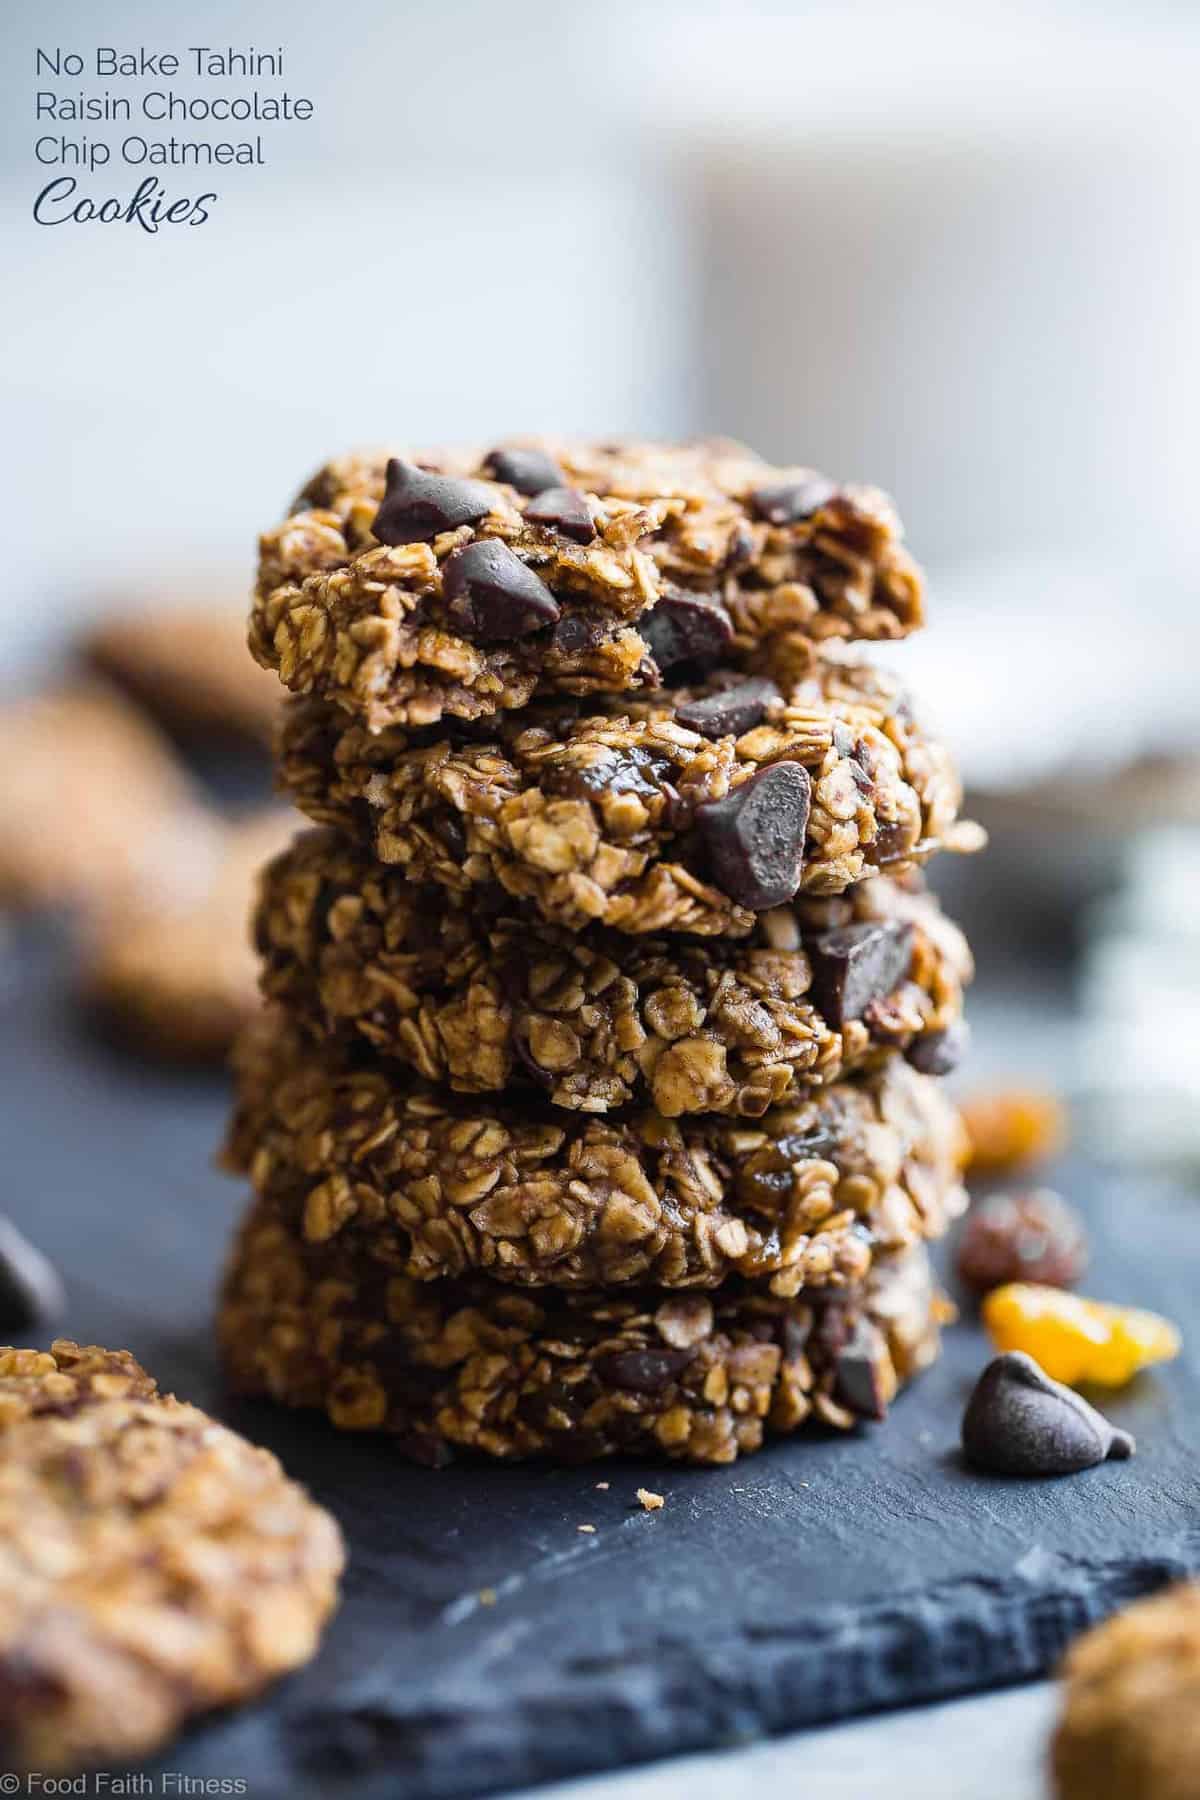 Vegan Gluten Free Oatmeal No Bake Cookies - These EASY, no bake oatmeal cookies have a surprise tahini twist, chocolate and notes of spicy cardamon and chewy golden raisins! A healthy, gluten/dairy/egg free treat for only 110 calories! | #Foodfaithfitness | #Vegan #NoBake #Healthy #ChocolateChip #Glutenfre